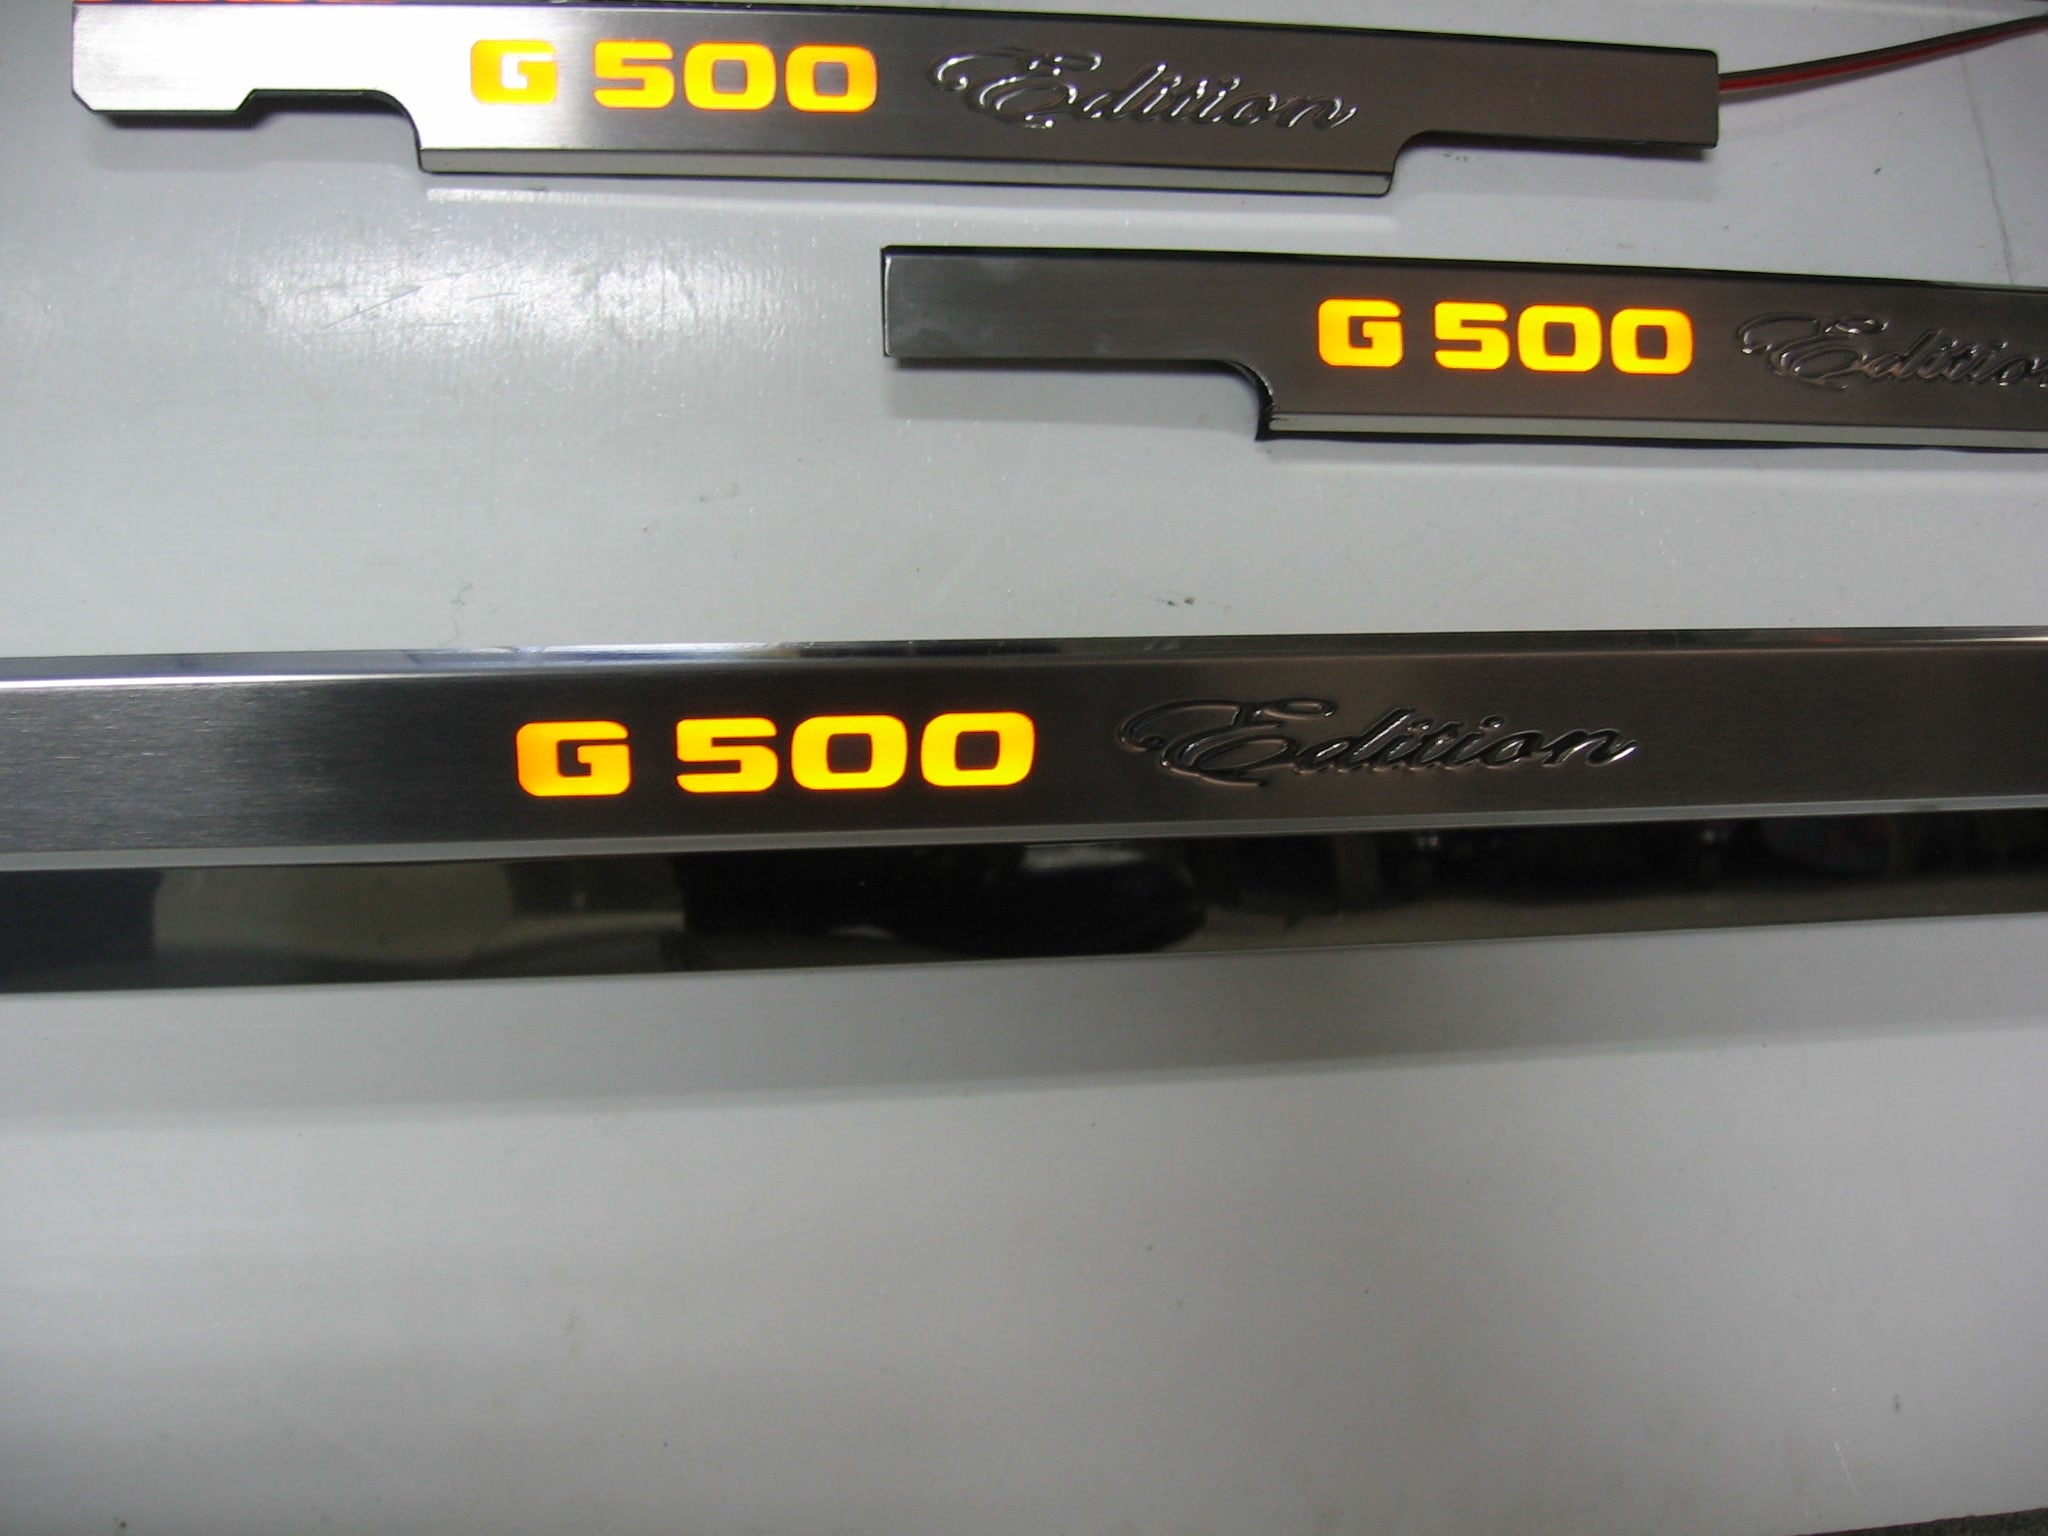 G500 LED Illuminated Door Sills 4 or 5 pcs for Mercedes-Benz G-Class W463